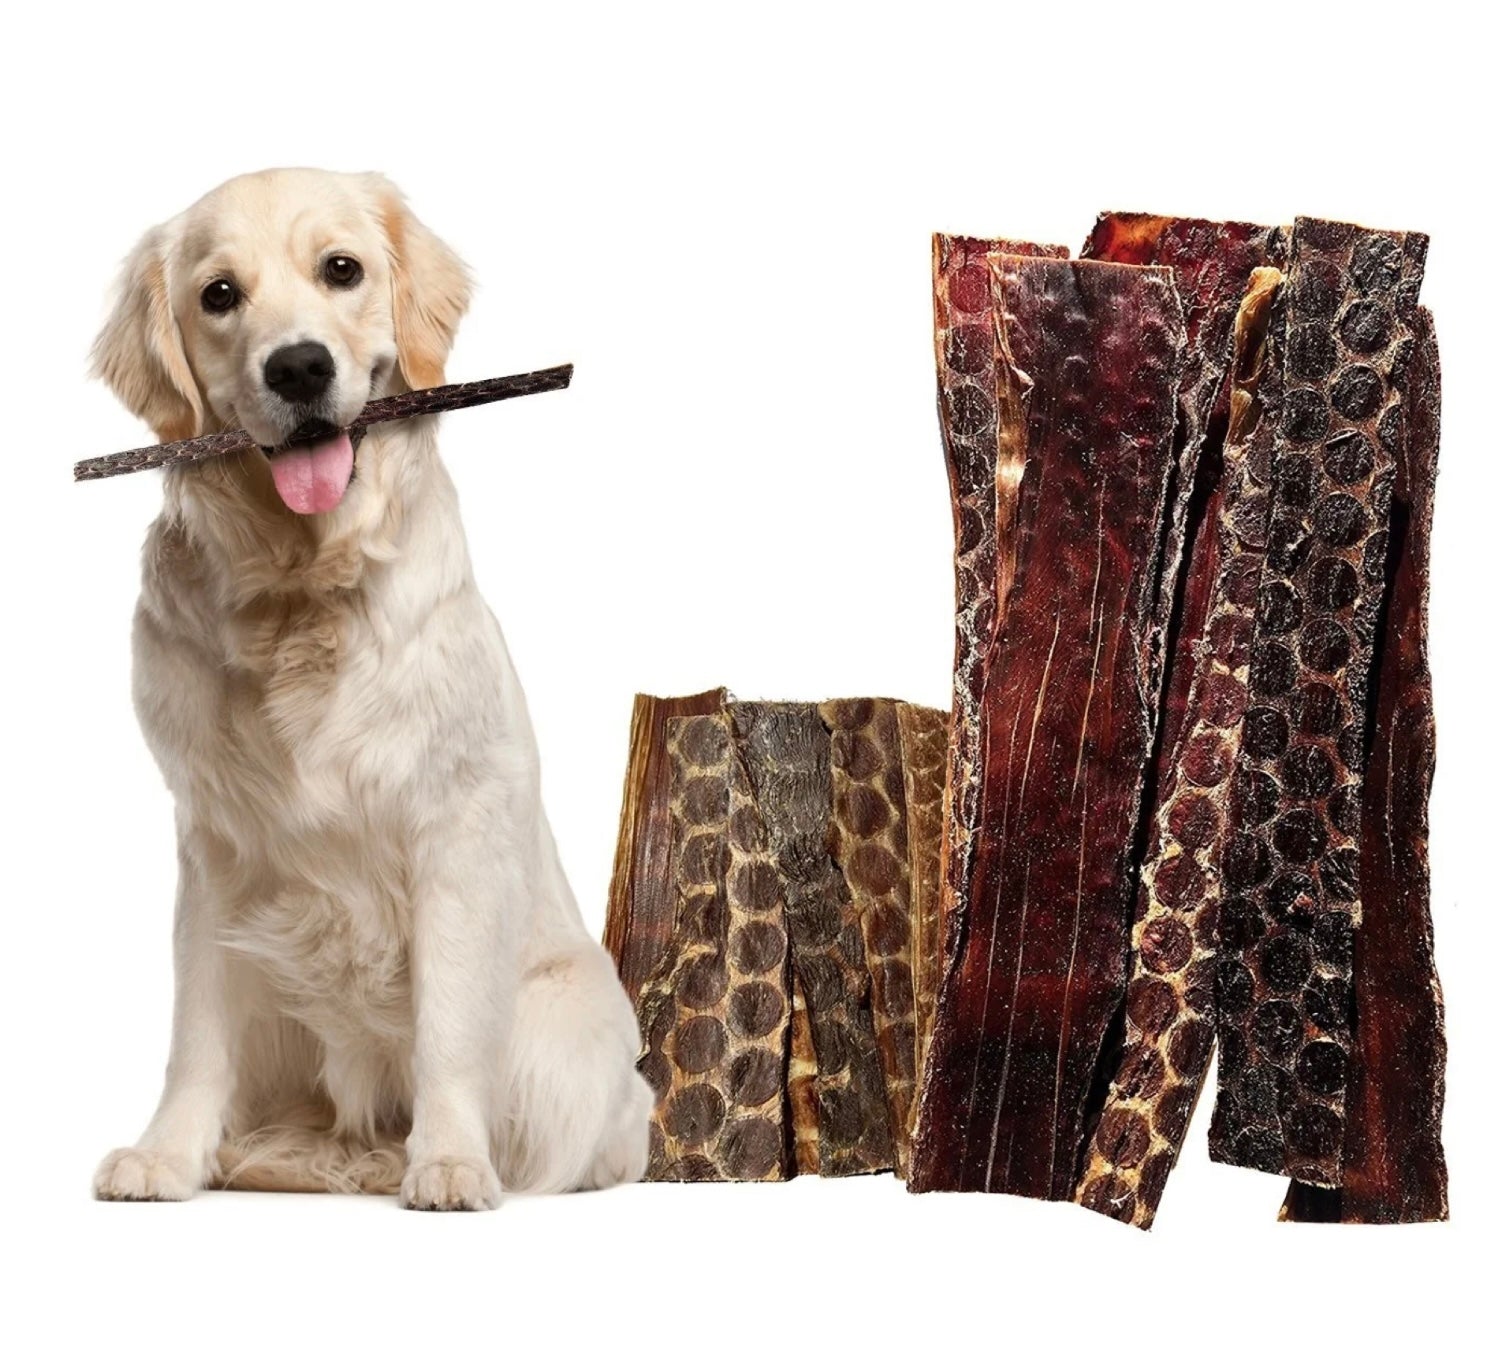 Celebrating National Jerky Day: A Treat for Humans and Dogs Alike